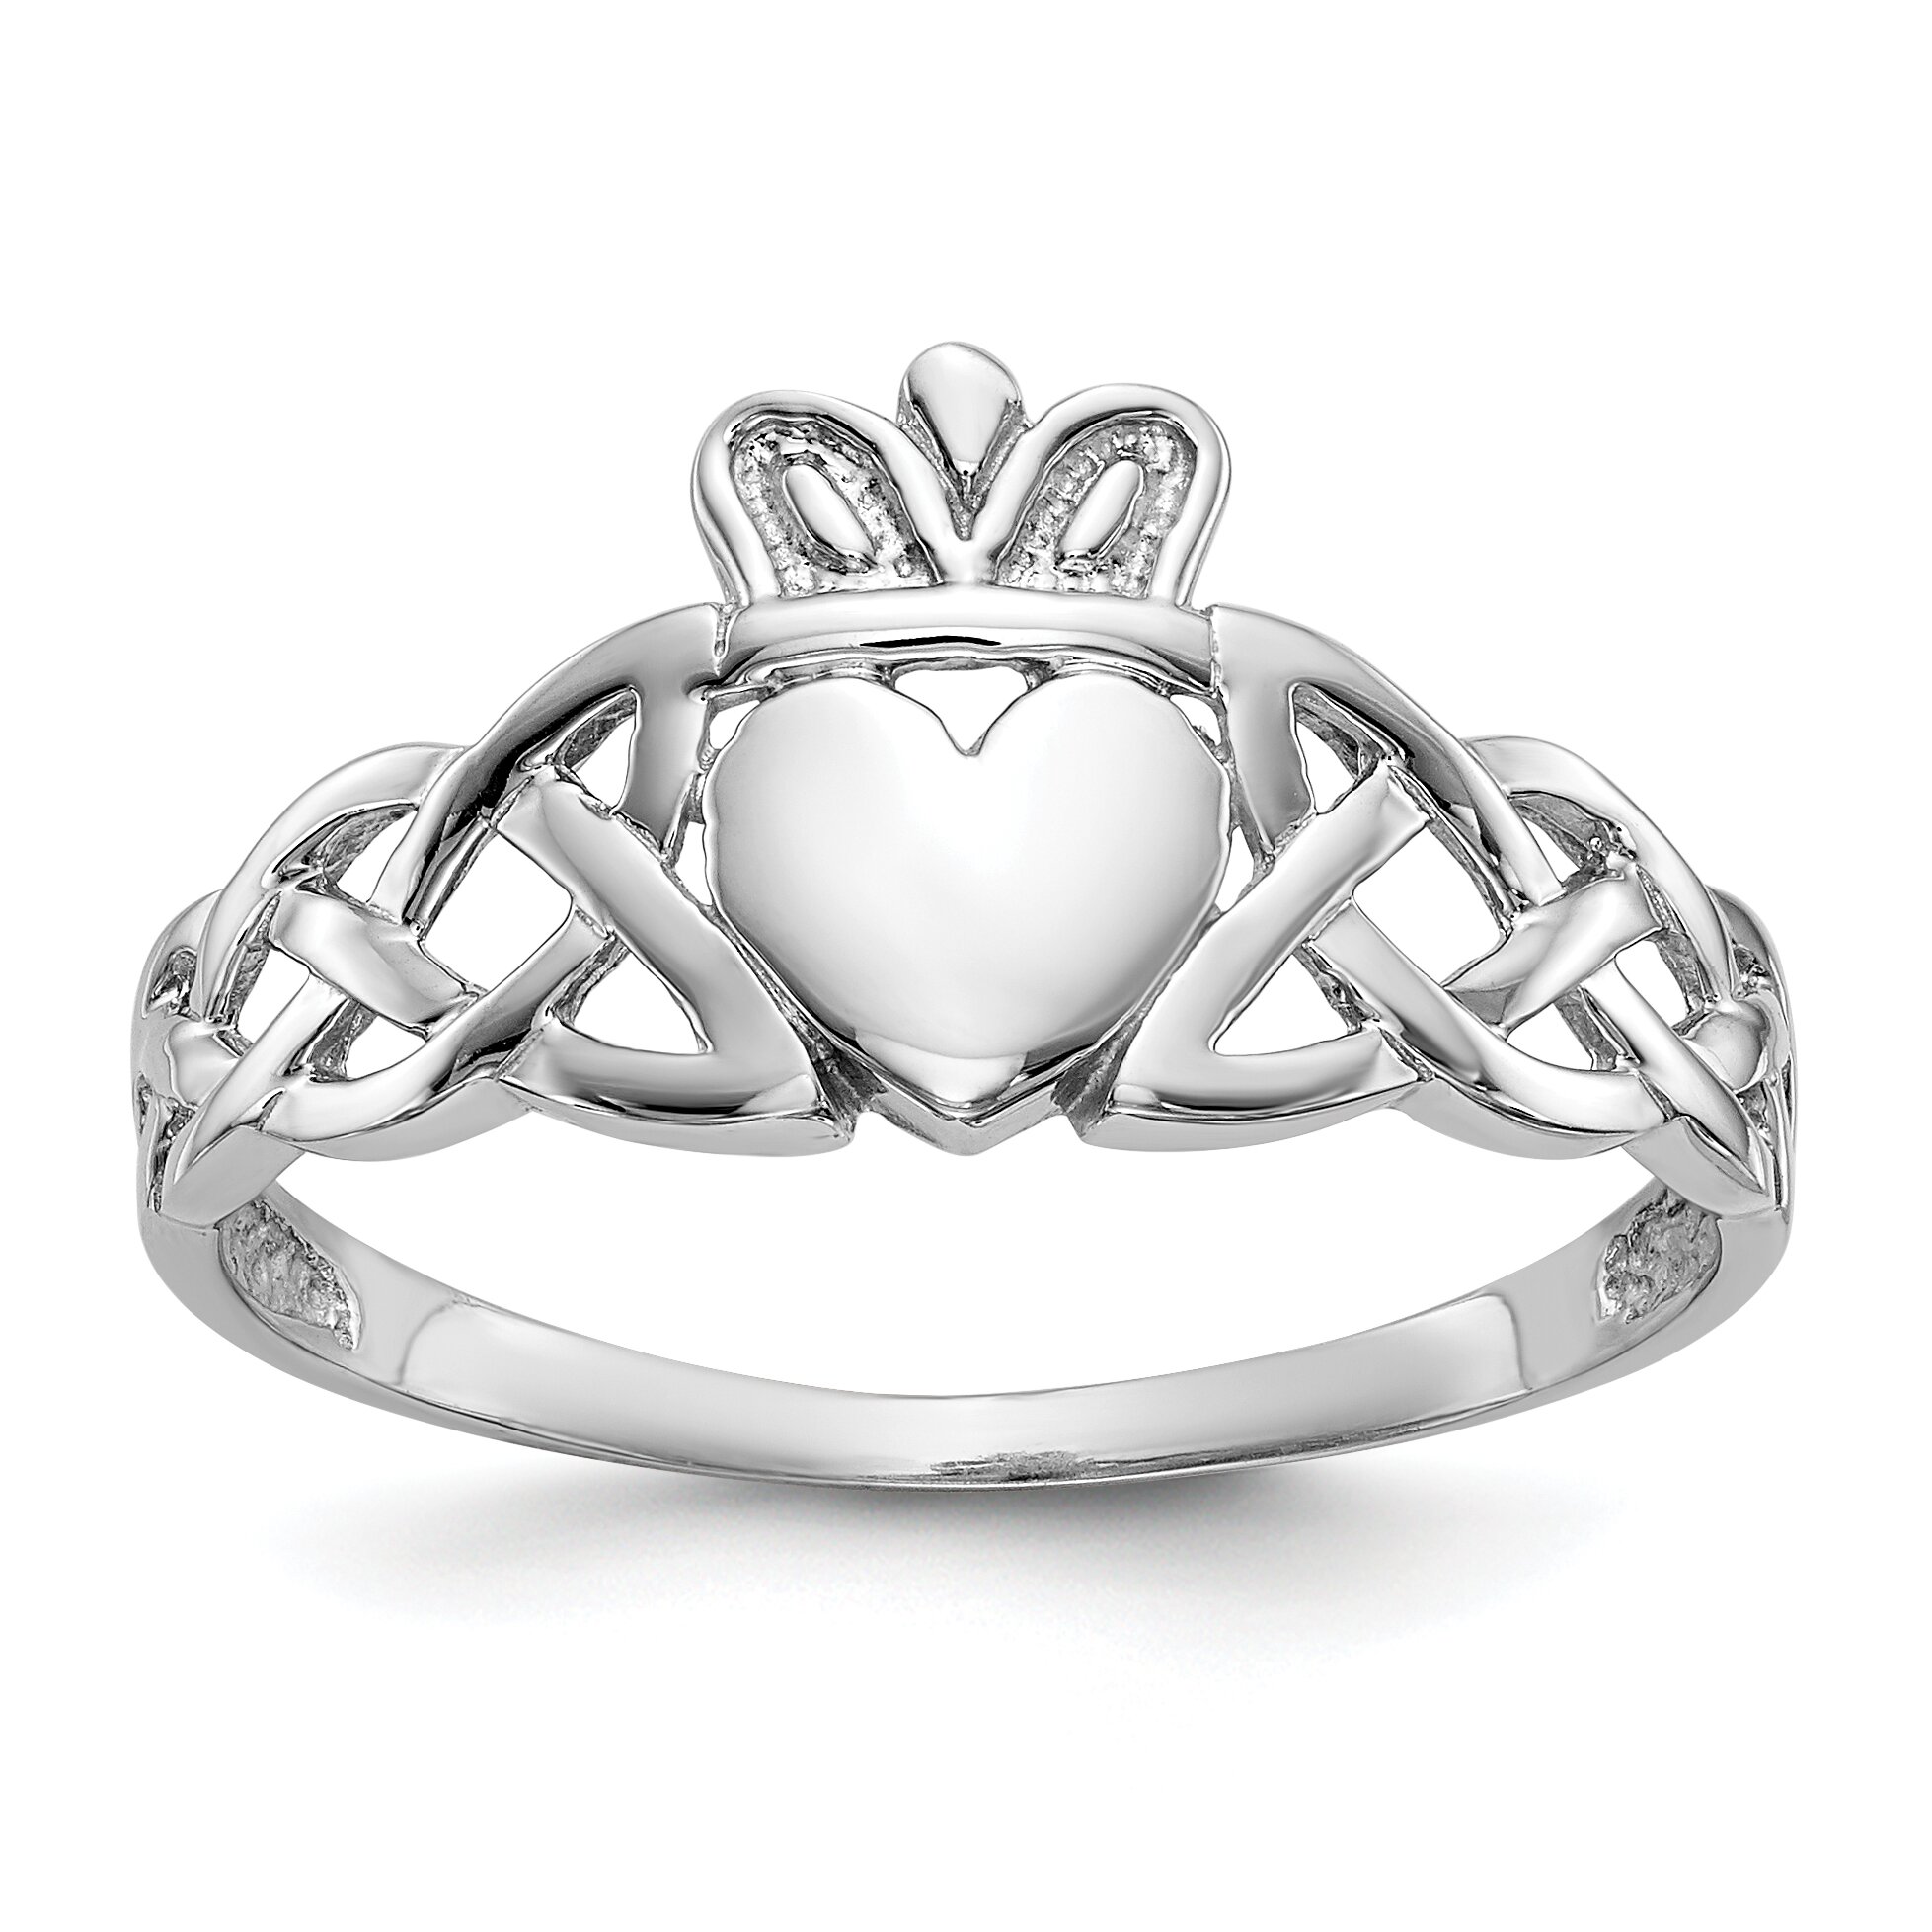 Findingking 14K White Gold Claddagh Ring Sz 9.5